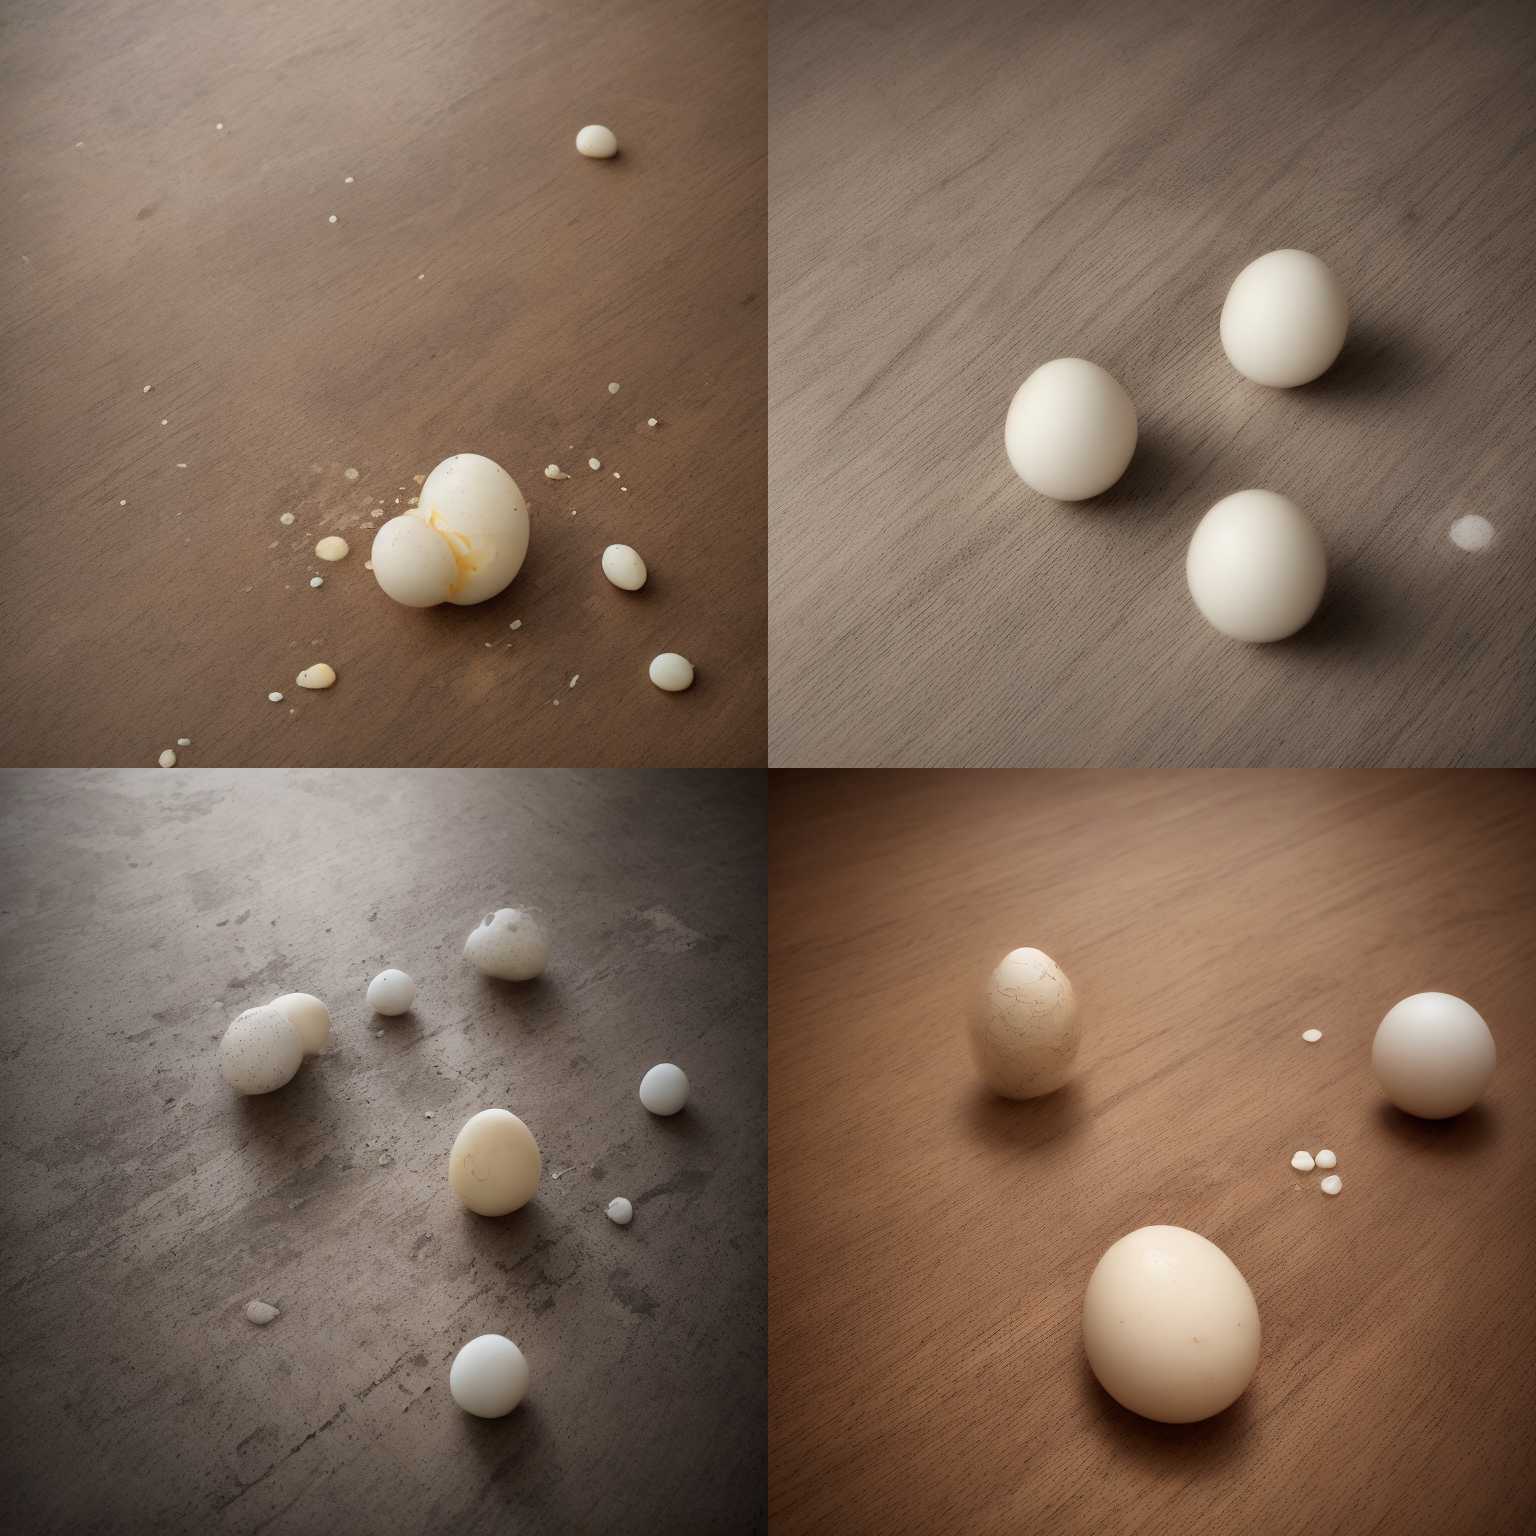 An egg dropped on the floor